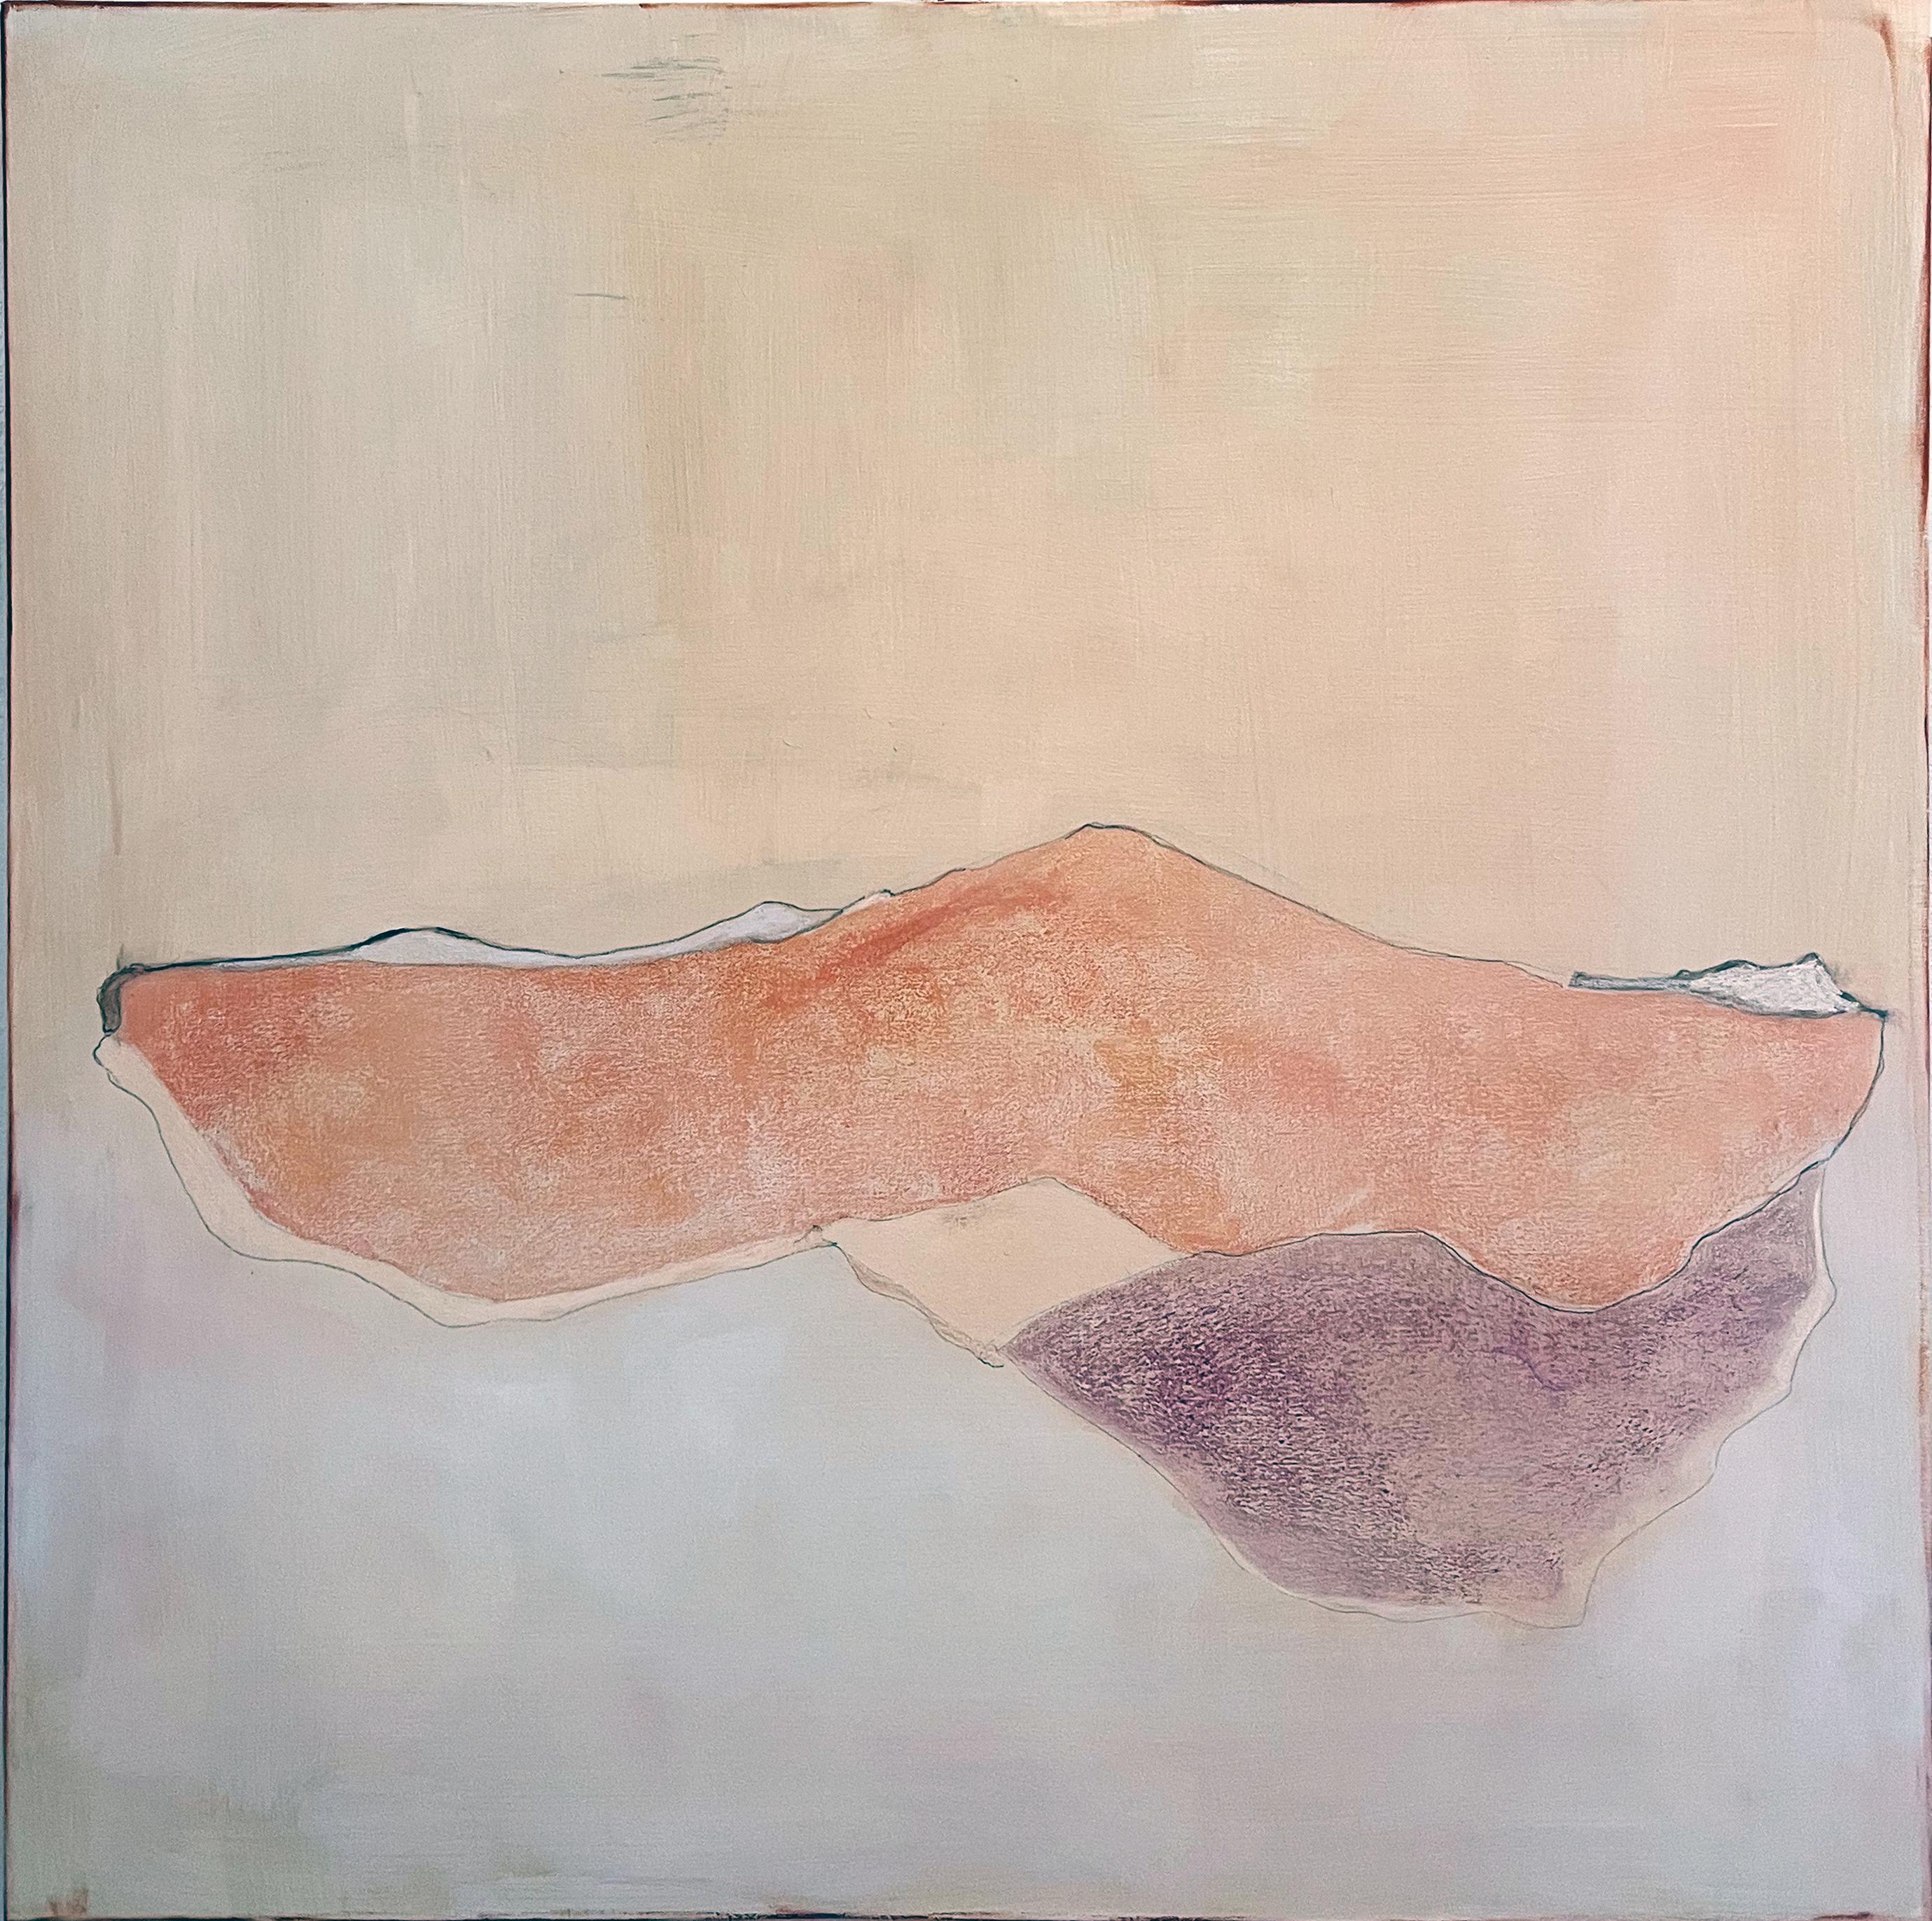 Landscape
Mixed media on Cotton Canvas
100x100 cm
Ready to Hang
Original Artwork

Marilina Marchica, born in 1984, was born in Agrigento, where she lives and works. She graduated in Painting at the Academy of Fine Arts in Bologna and at the